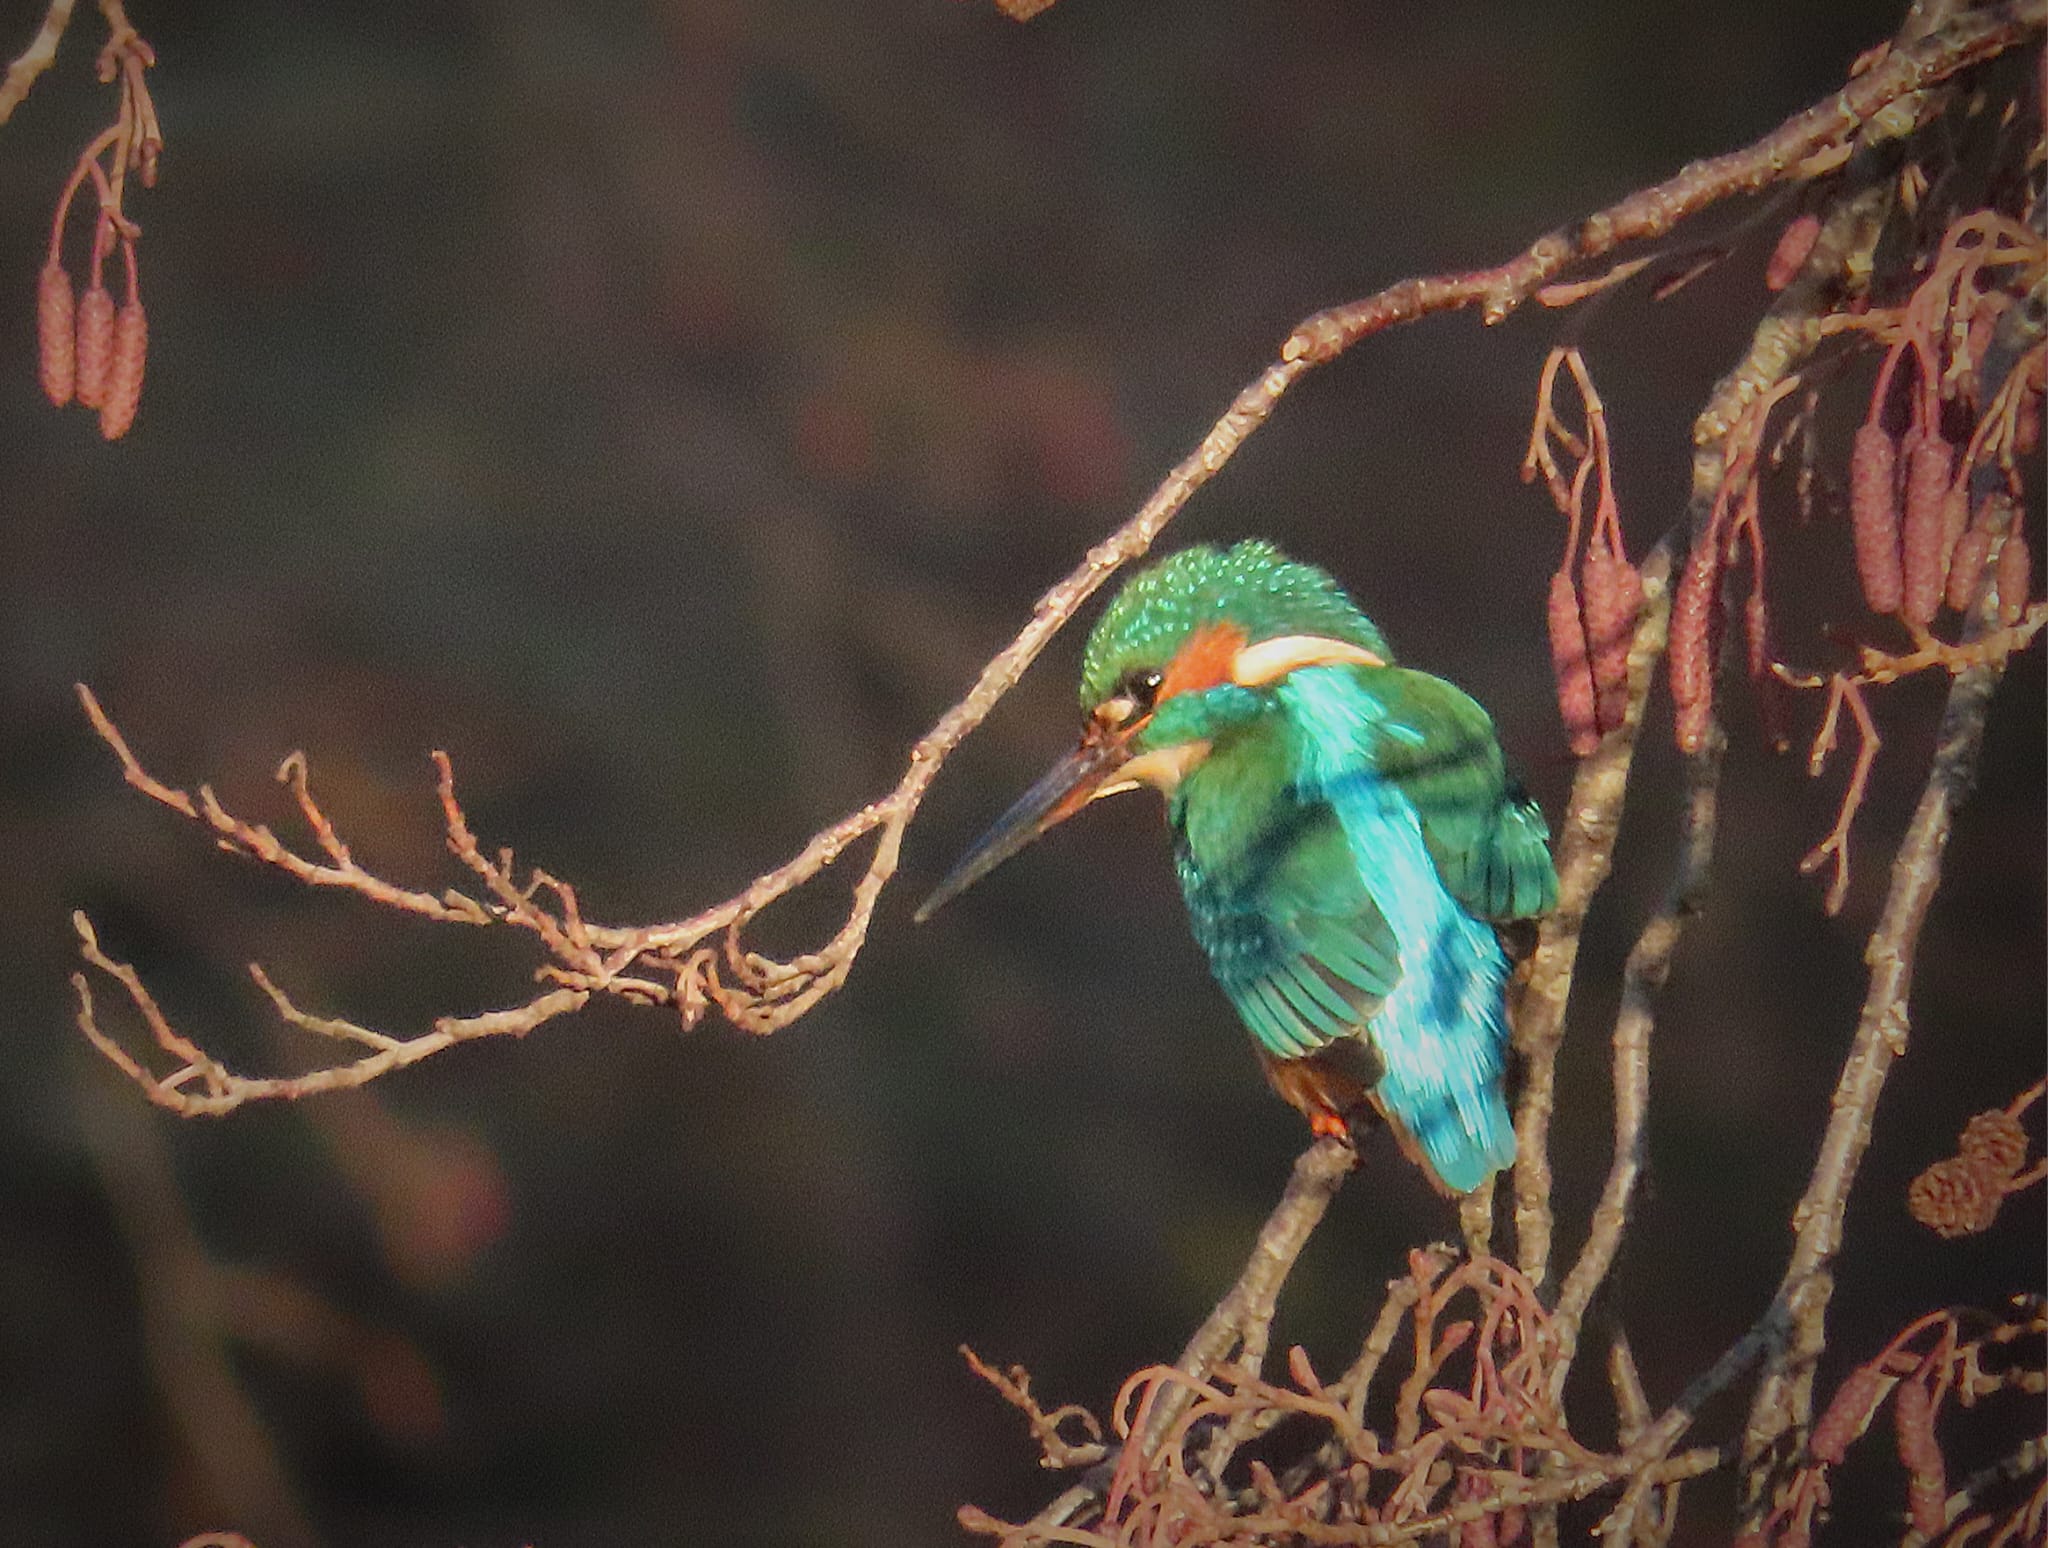 Kingfisher perched in a tree